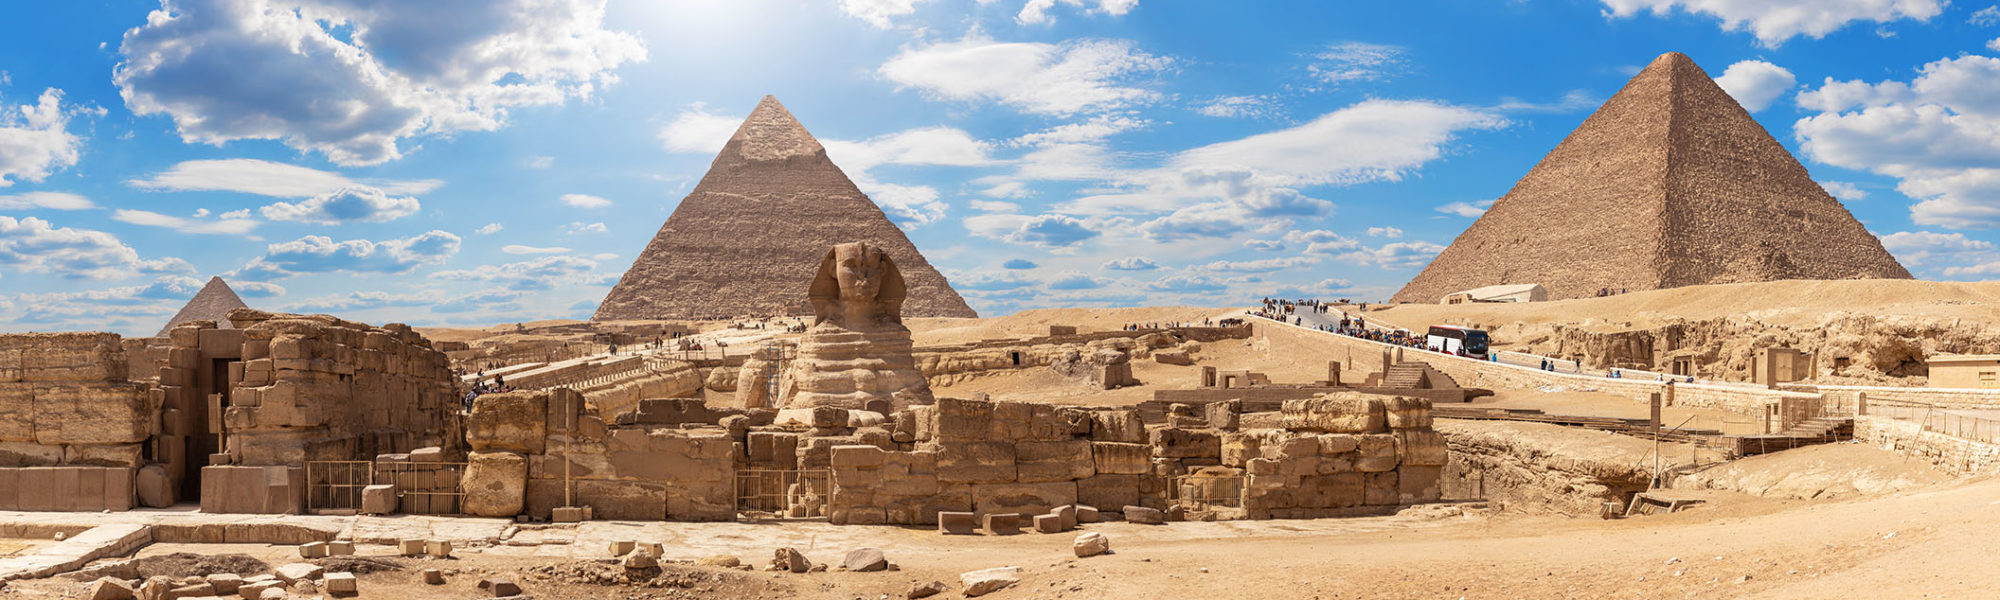 A panorama tour by Jaya Travel & Tours of the Pyramids of Giza and the Sphinx in beautiful Cairo, Egypt.